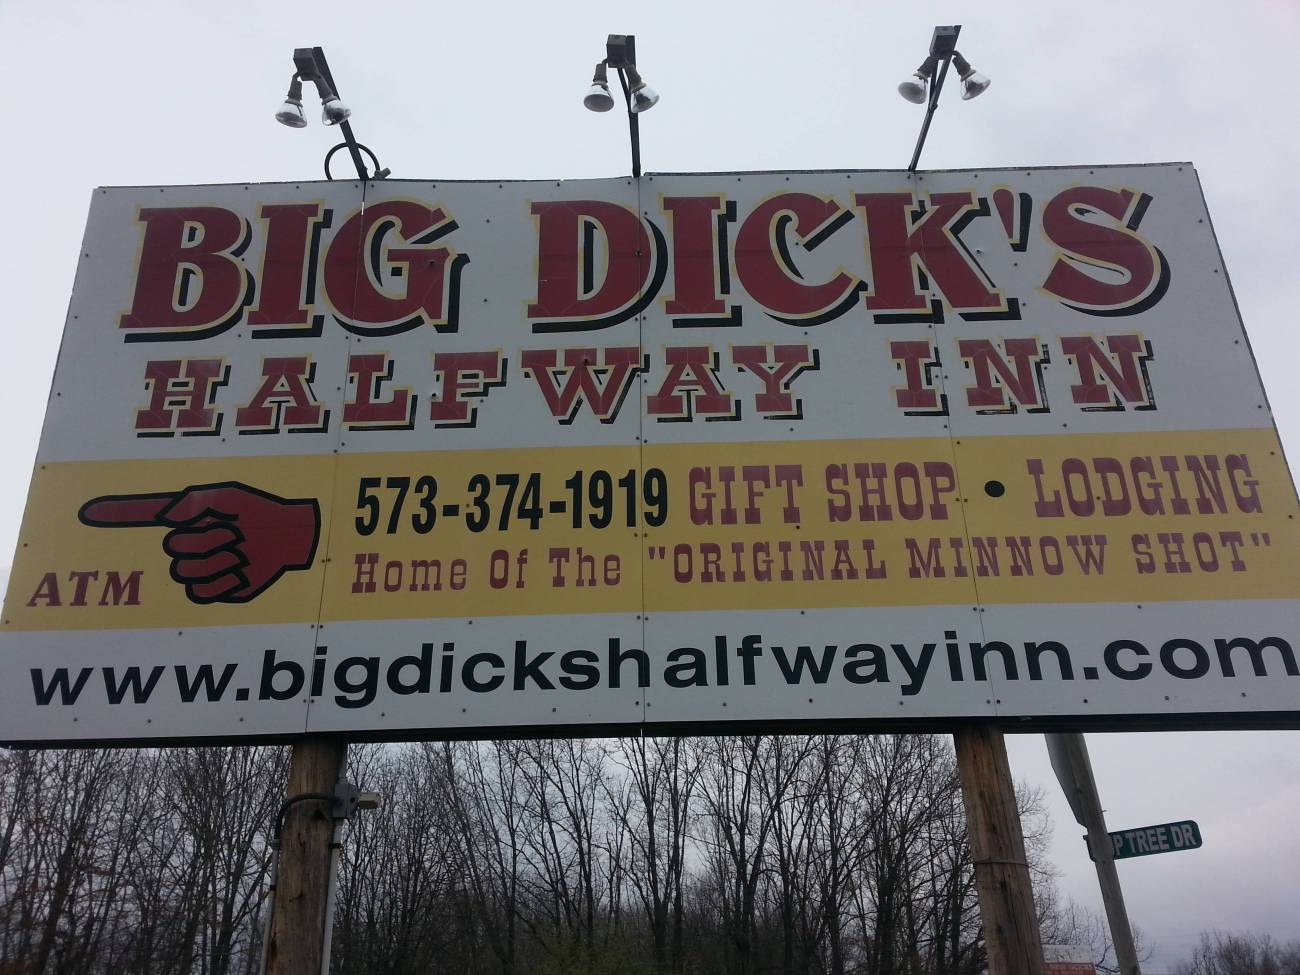 funny business signs - Big Dick'S Halfway Inn 5733741919 Gift Shop Lodging Home Of The "Original Minnow Shot" Atm P Tree Dr